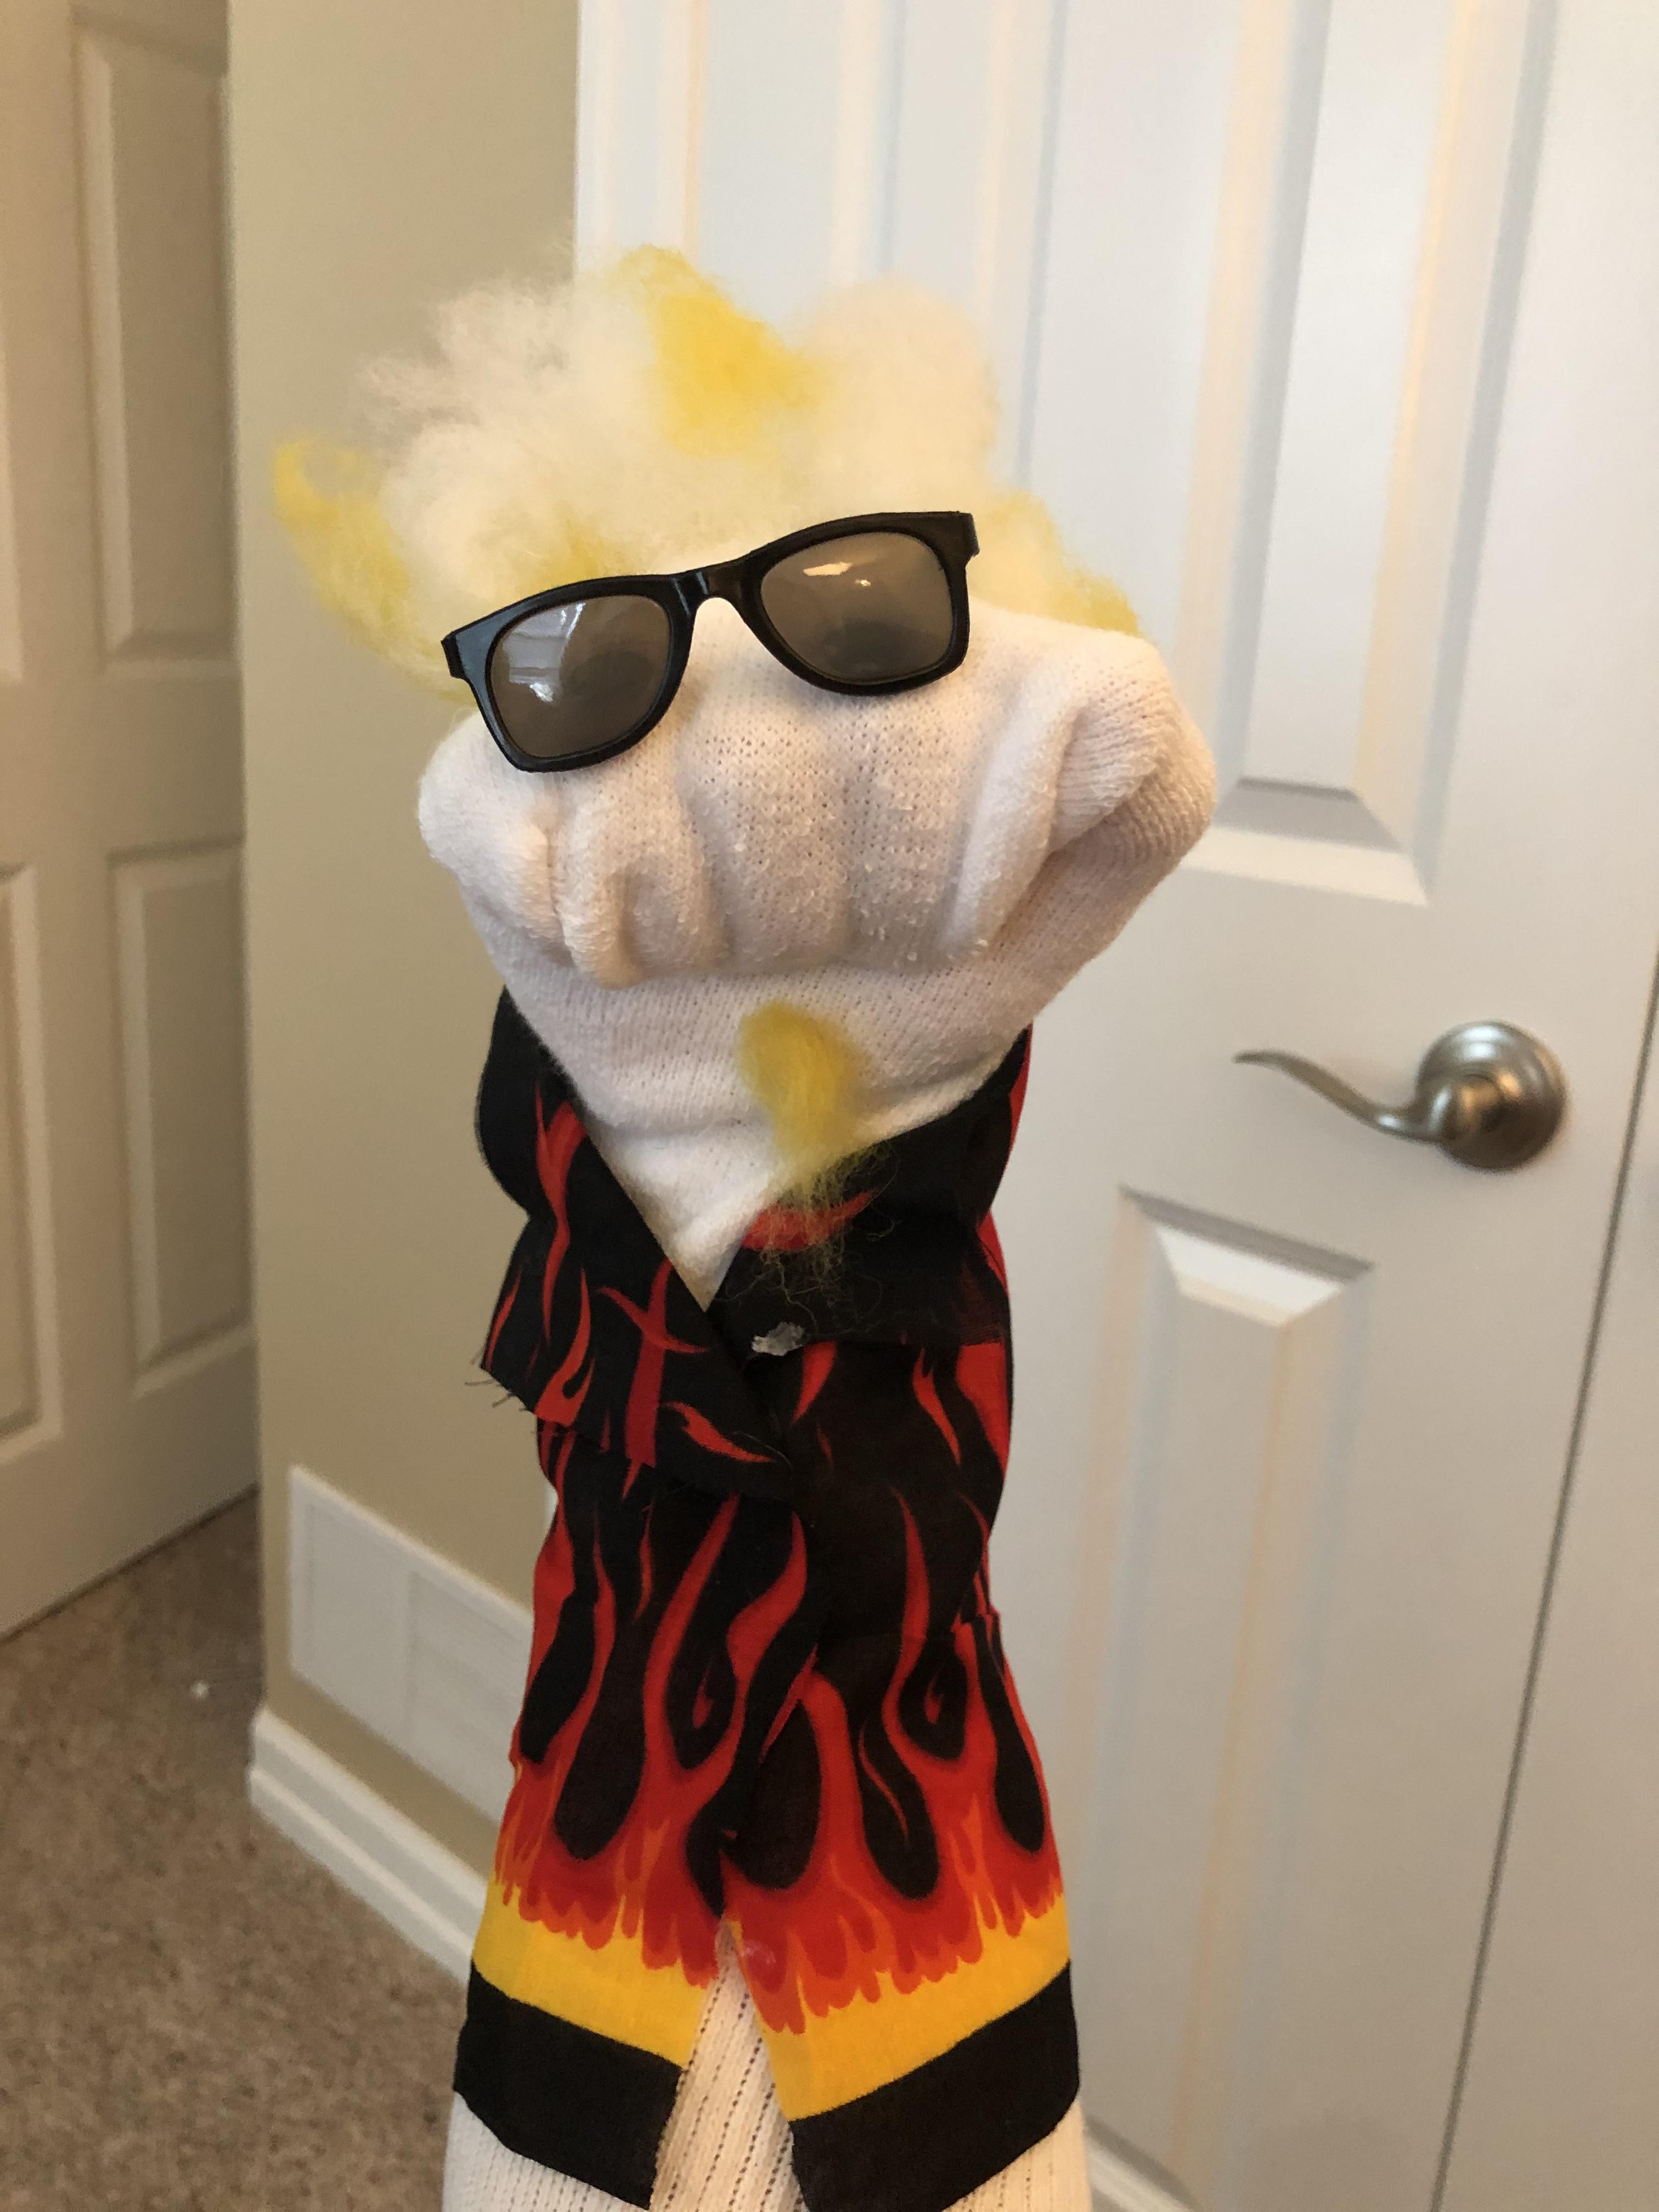 I made a Guy Fieri sock puppet today. No, unemployment is going great, why do you ask?